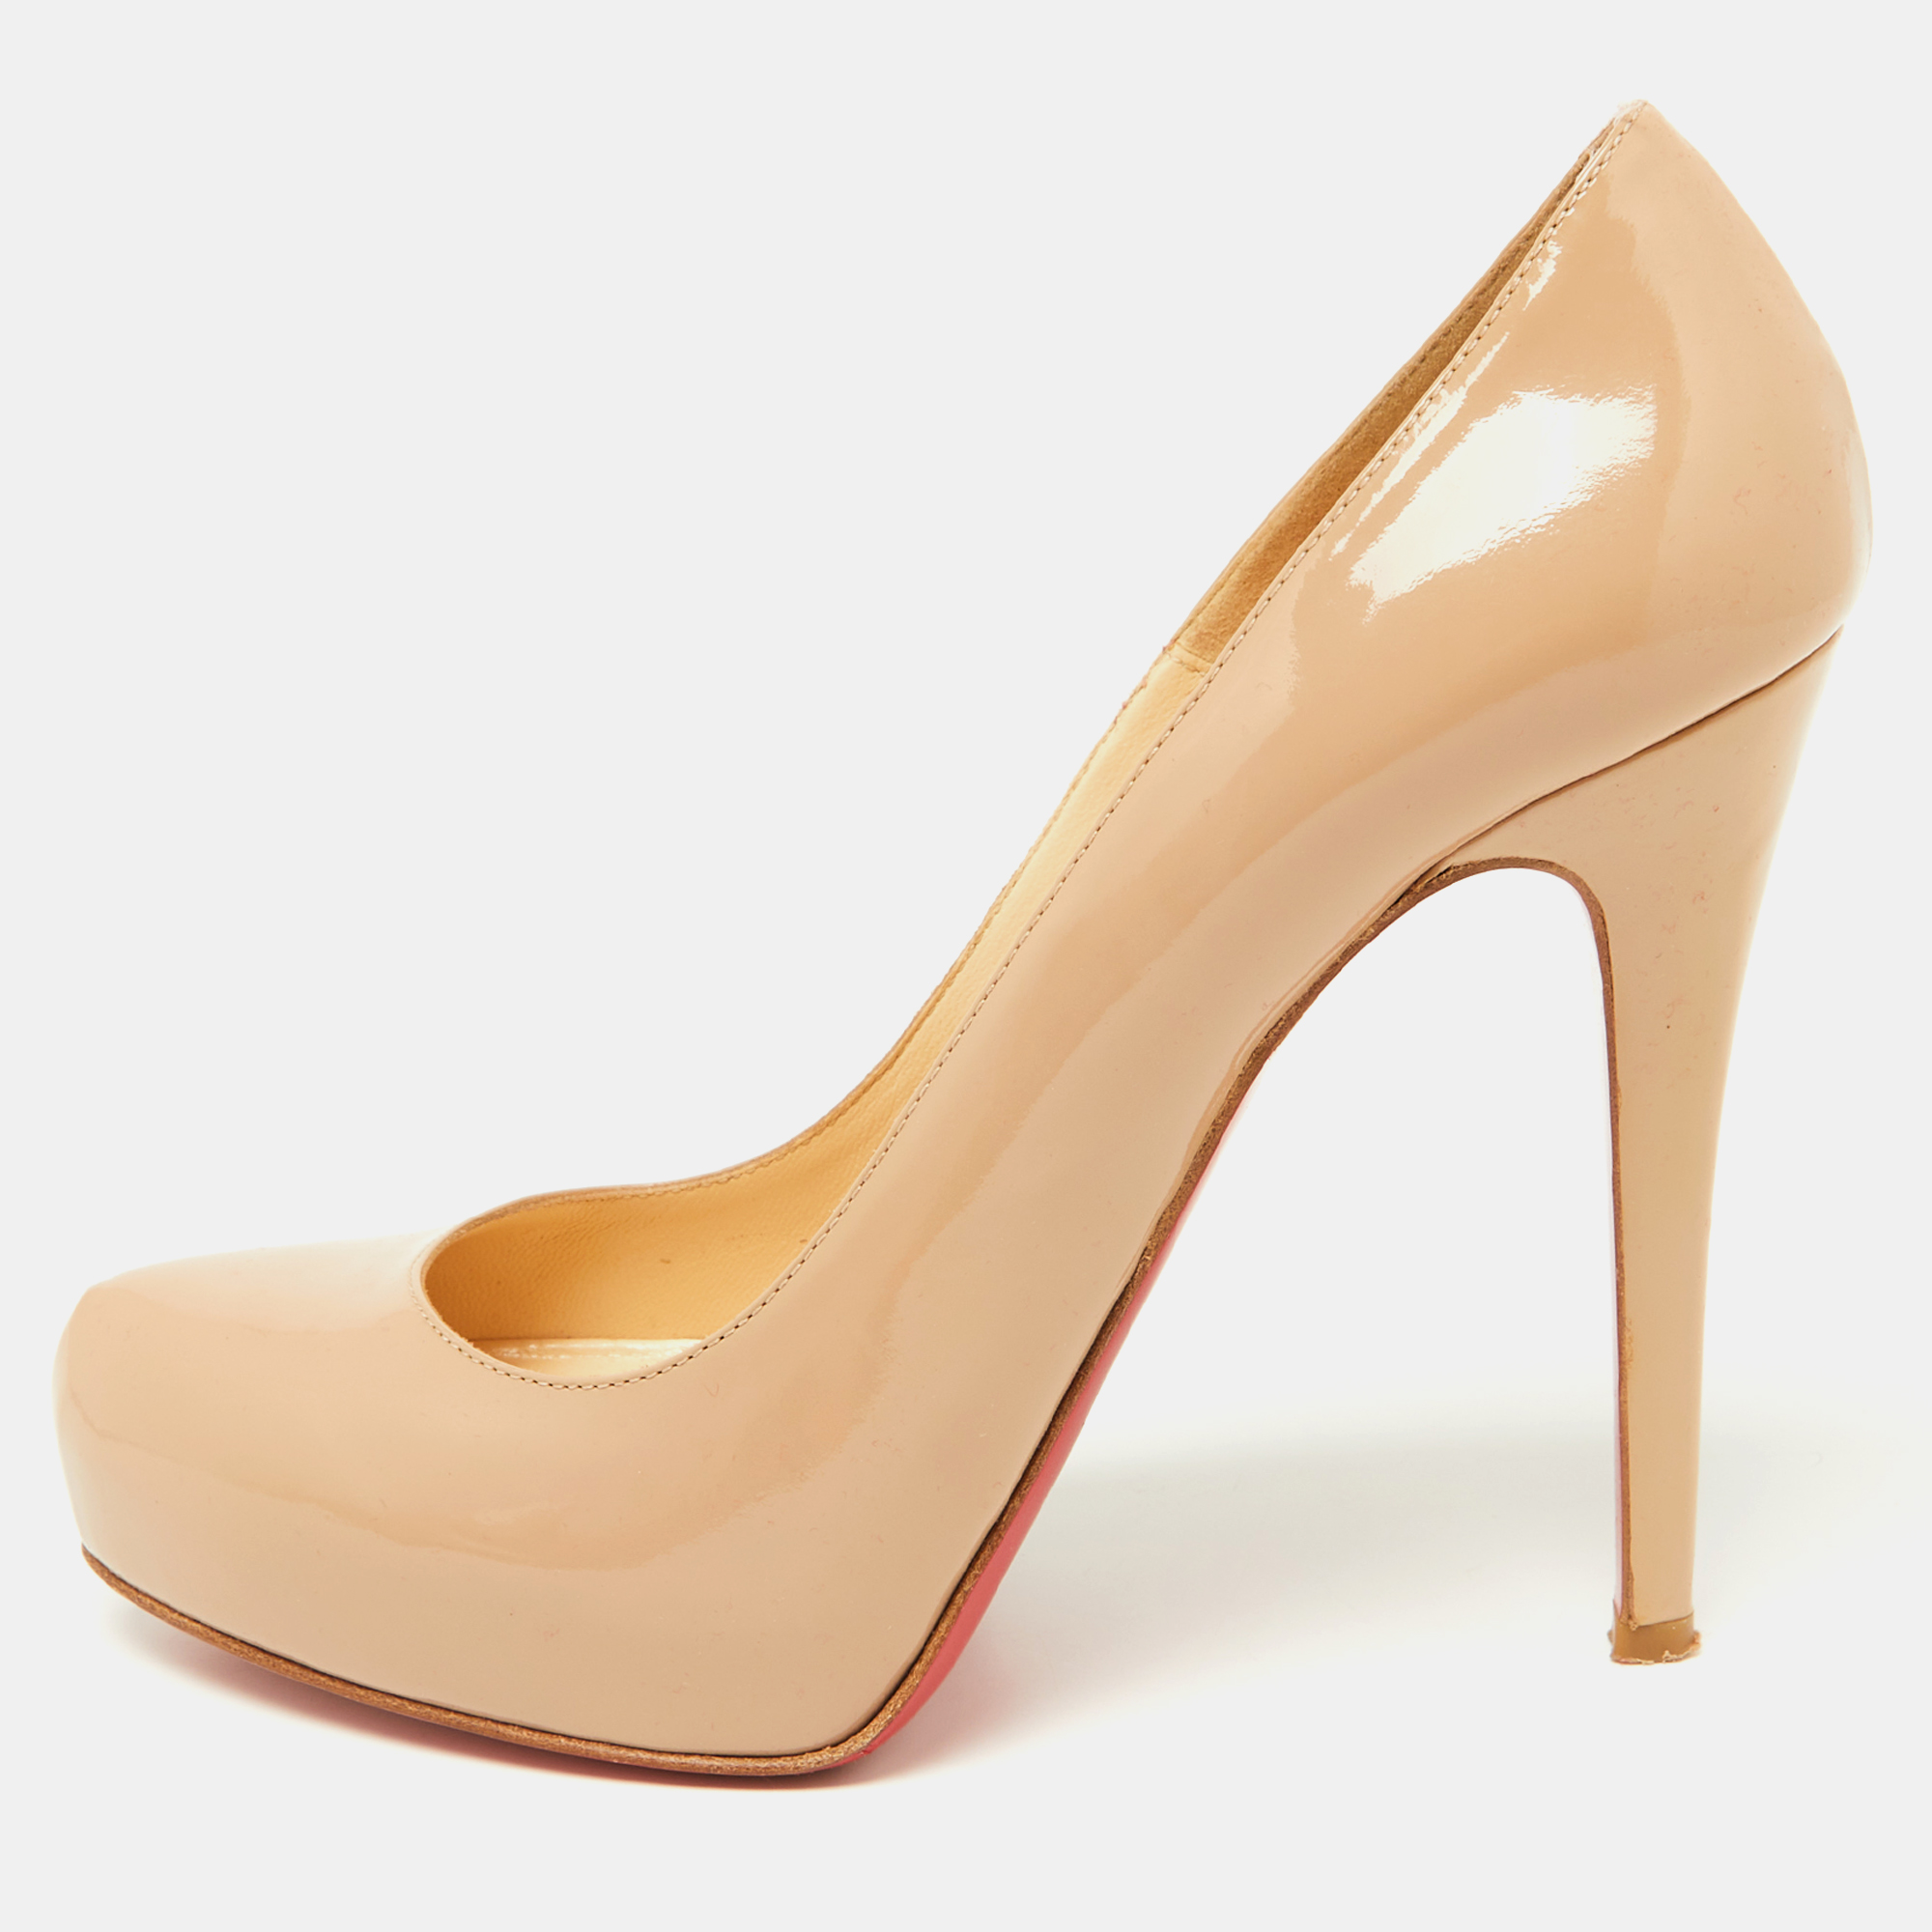 Pre-owned Christian Louboutin Beige Patent Leather Rolando Pumps Size 39